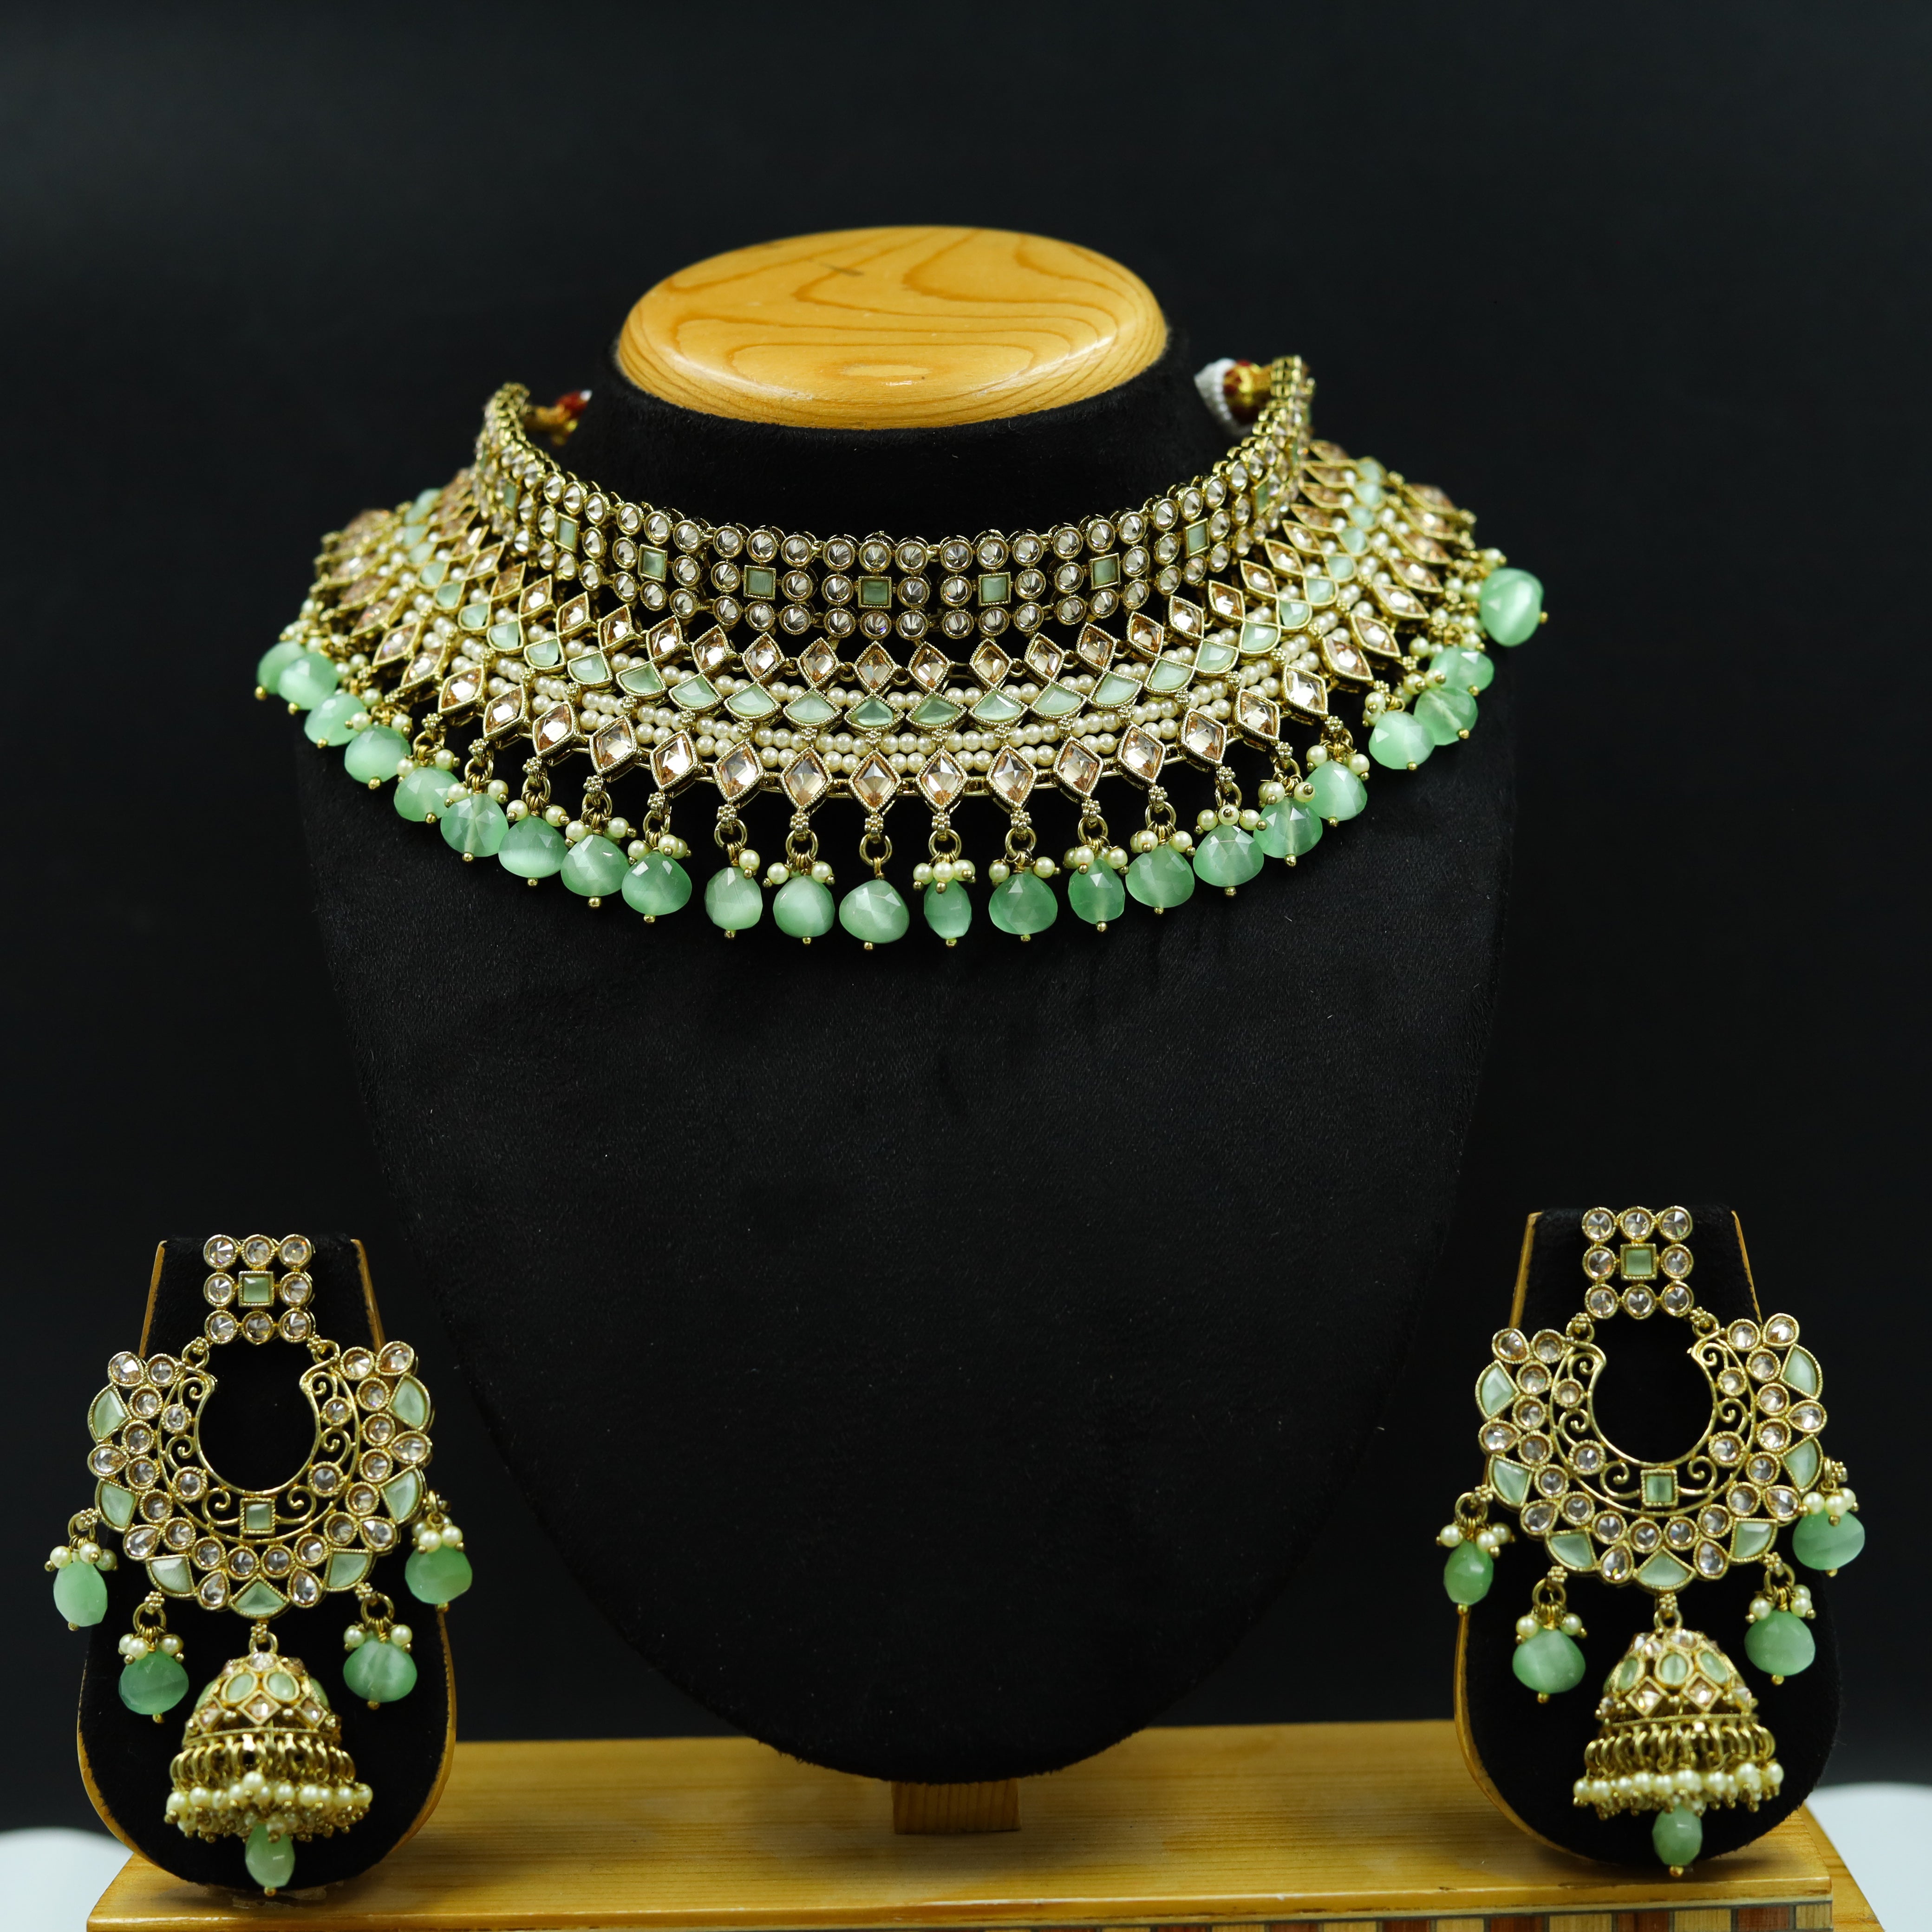 Dominique - Crystal emerald green Statement necklace set